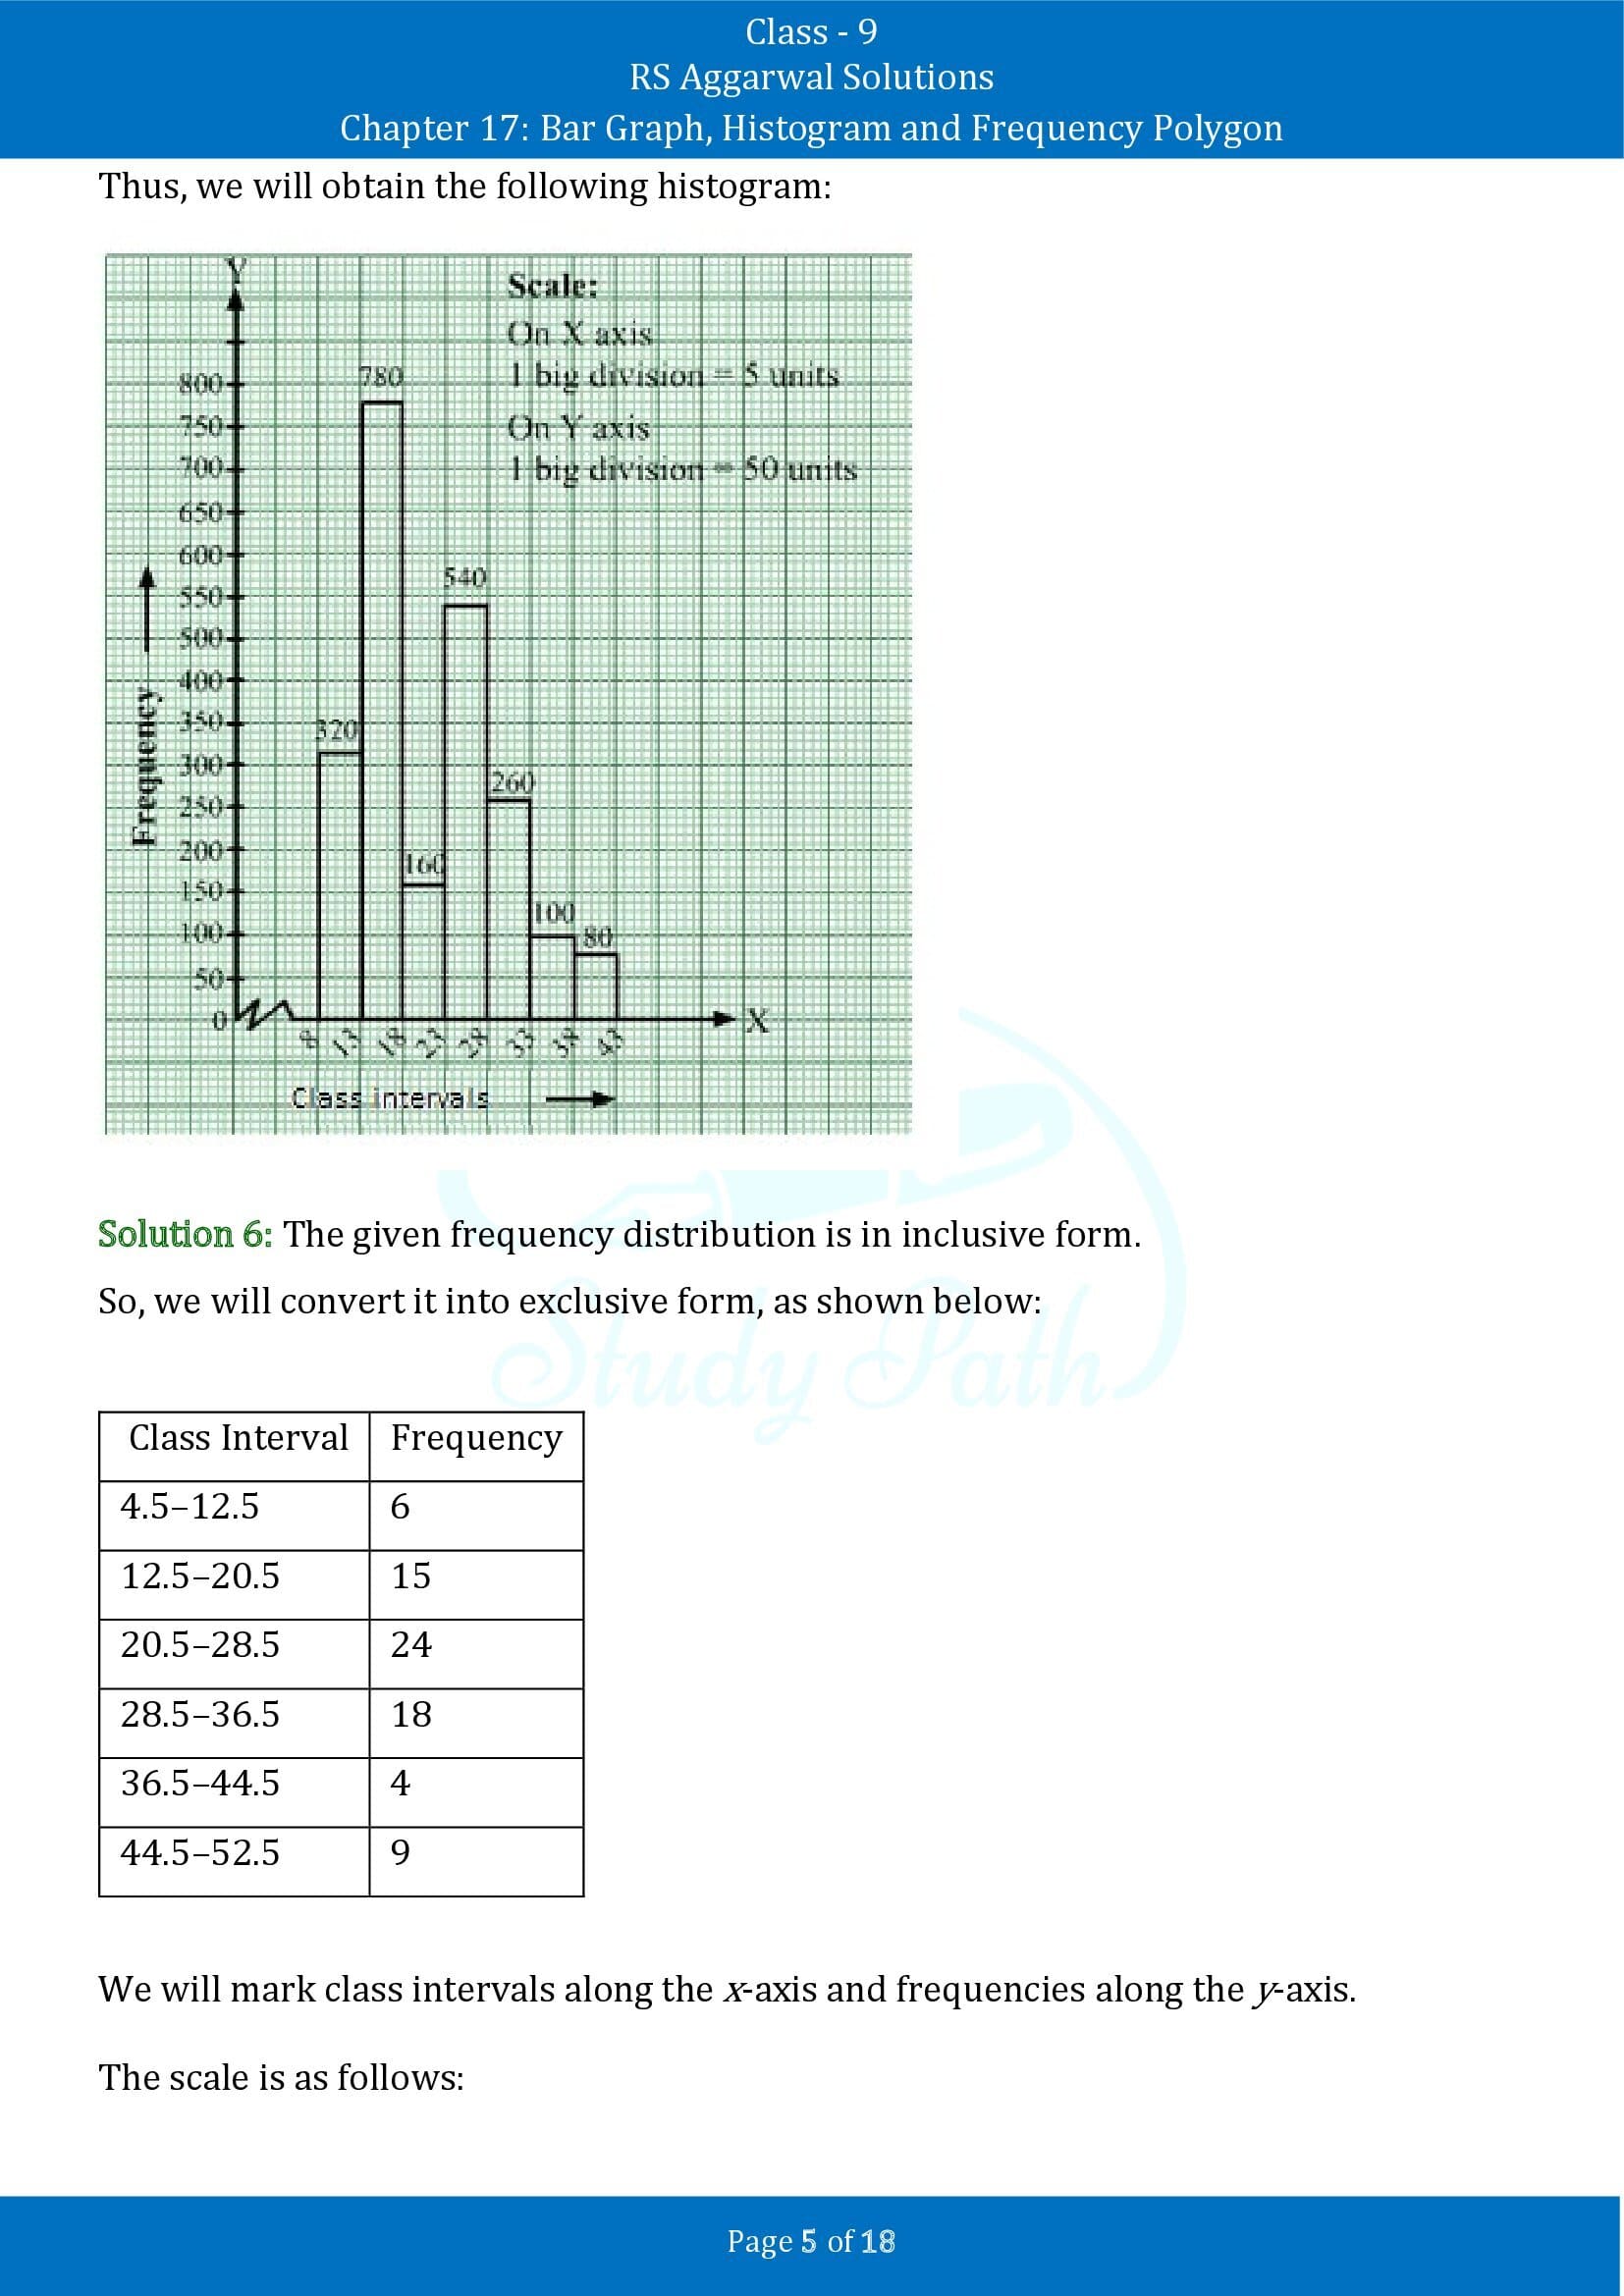 RS Aggarwal Solutions Class 9 Chapter 17 Bar Graph Histogram and Frequency Polygon Exercise 17B 00005